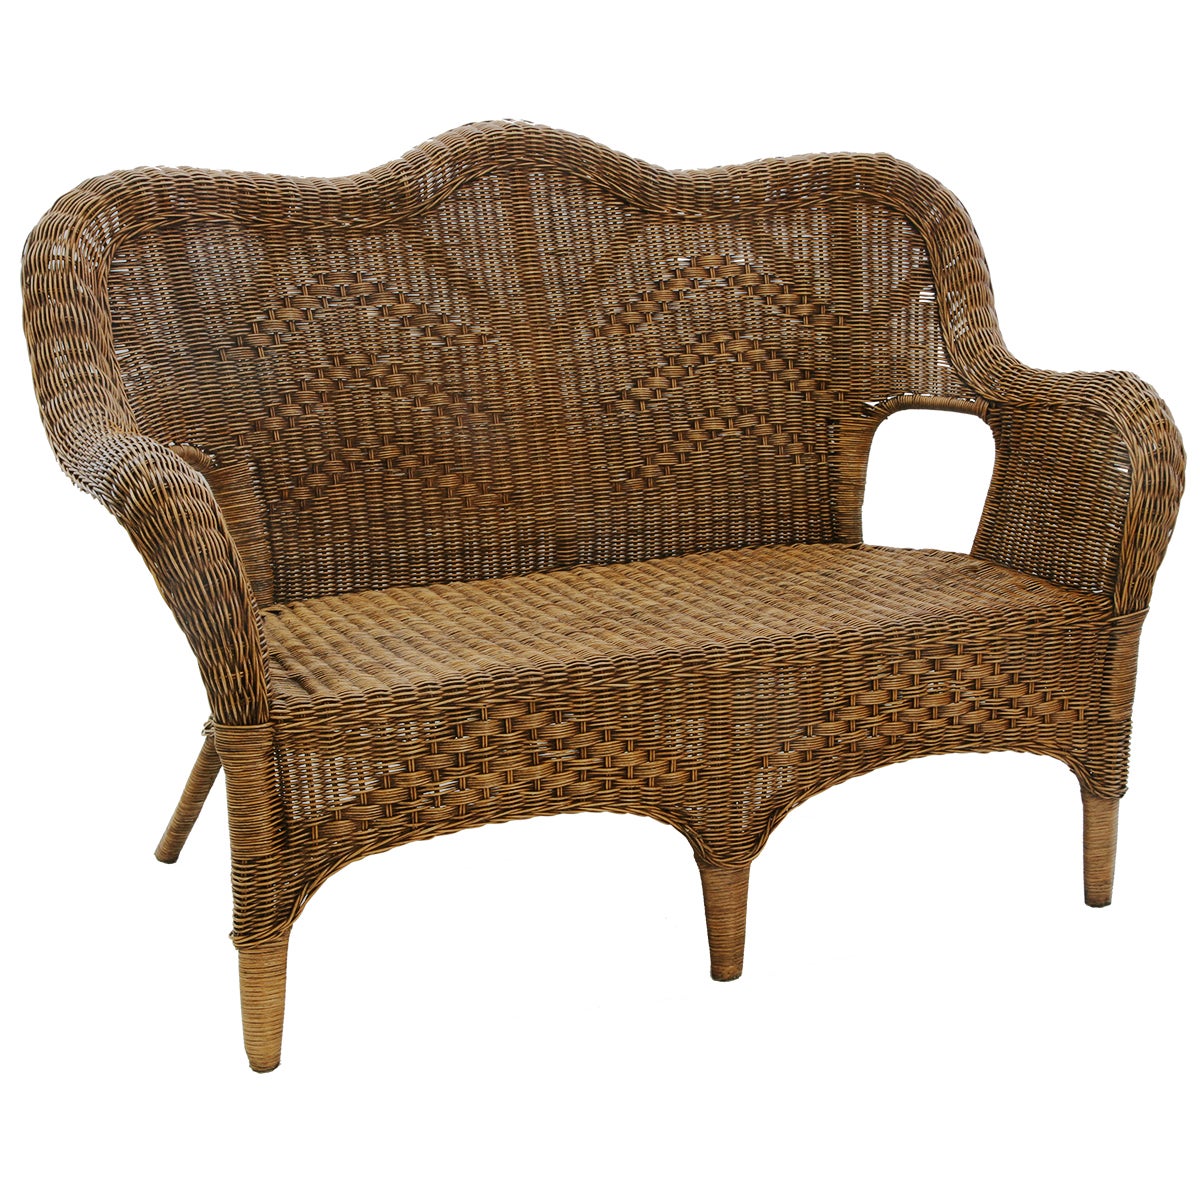 Windsor 2 Seat Cane/Rattan Chair Settee in Antique Brown